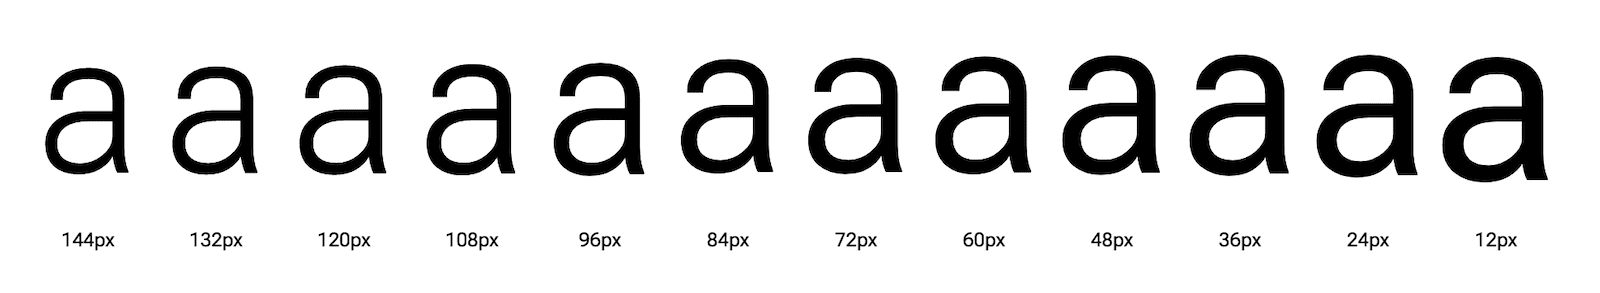 The letter 'a' shown at different optical sizes